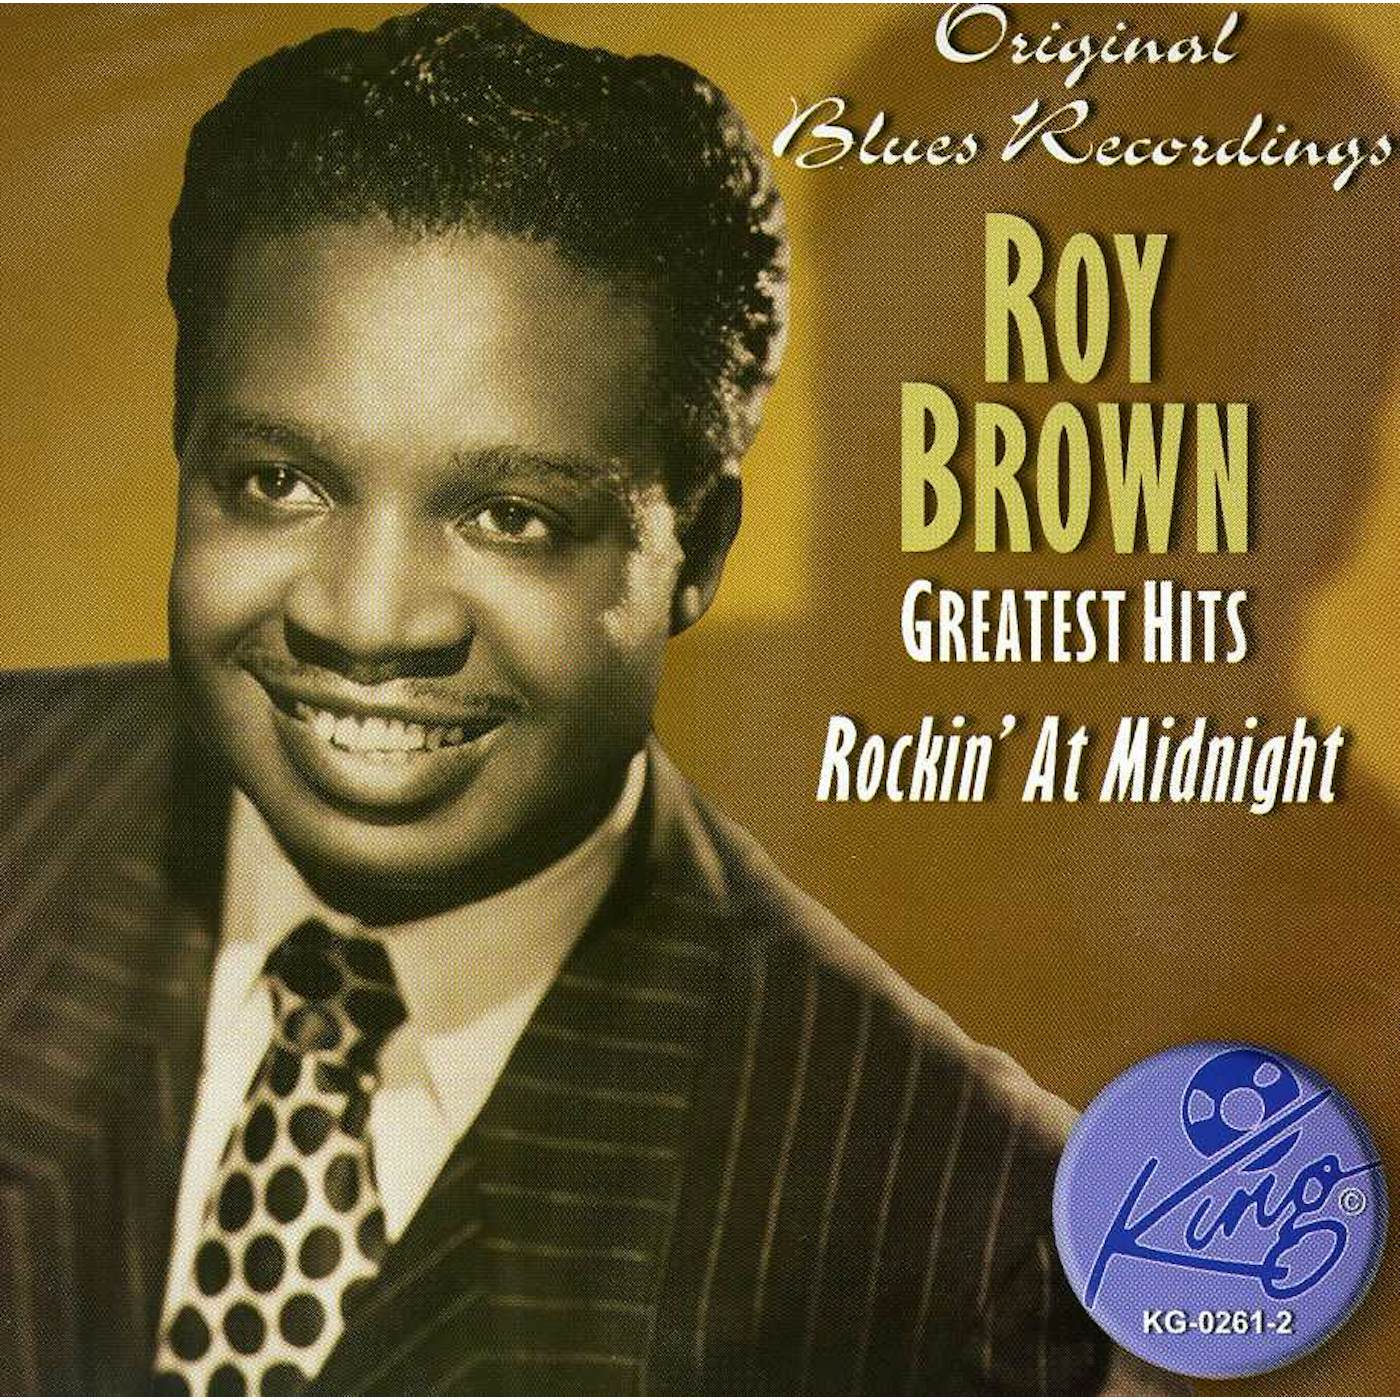 Roy Brown GREATEST HITS CD